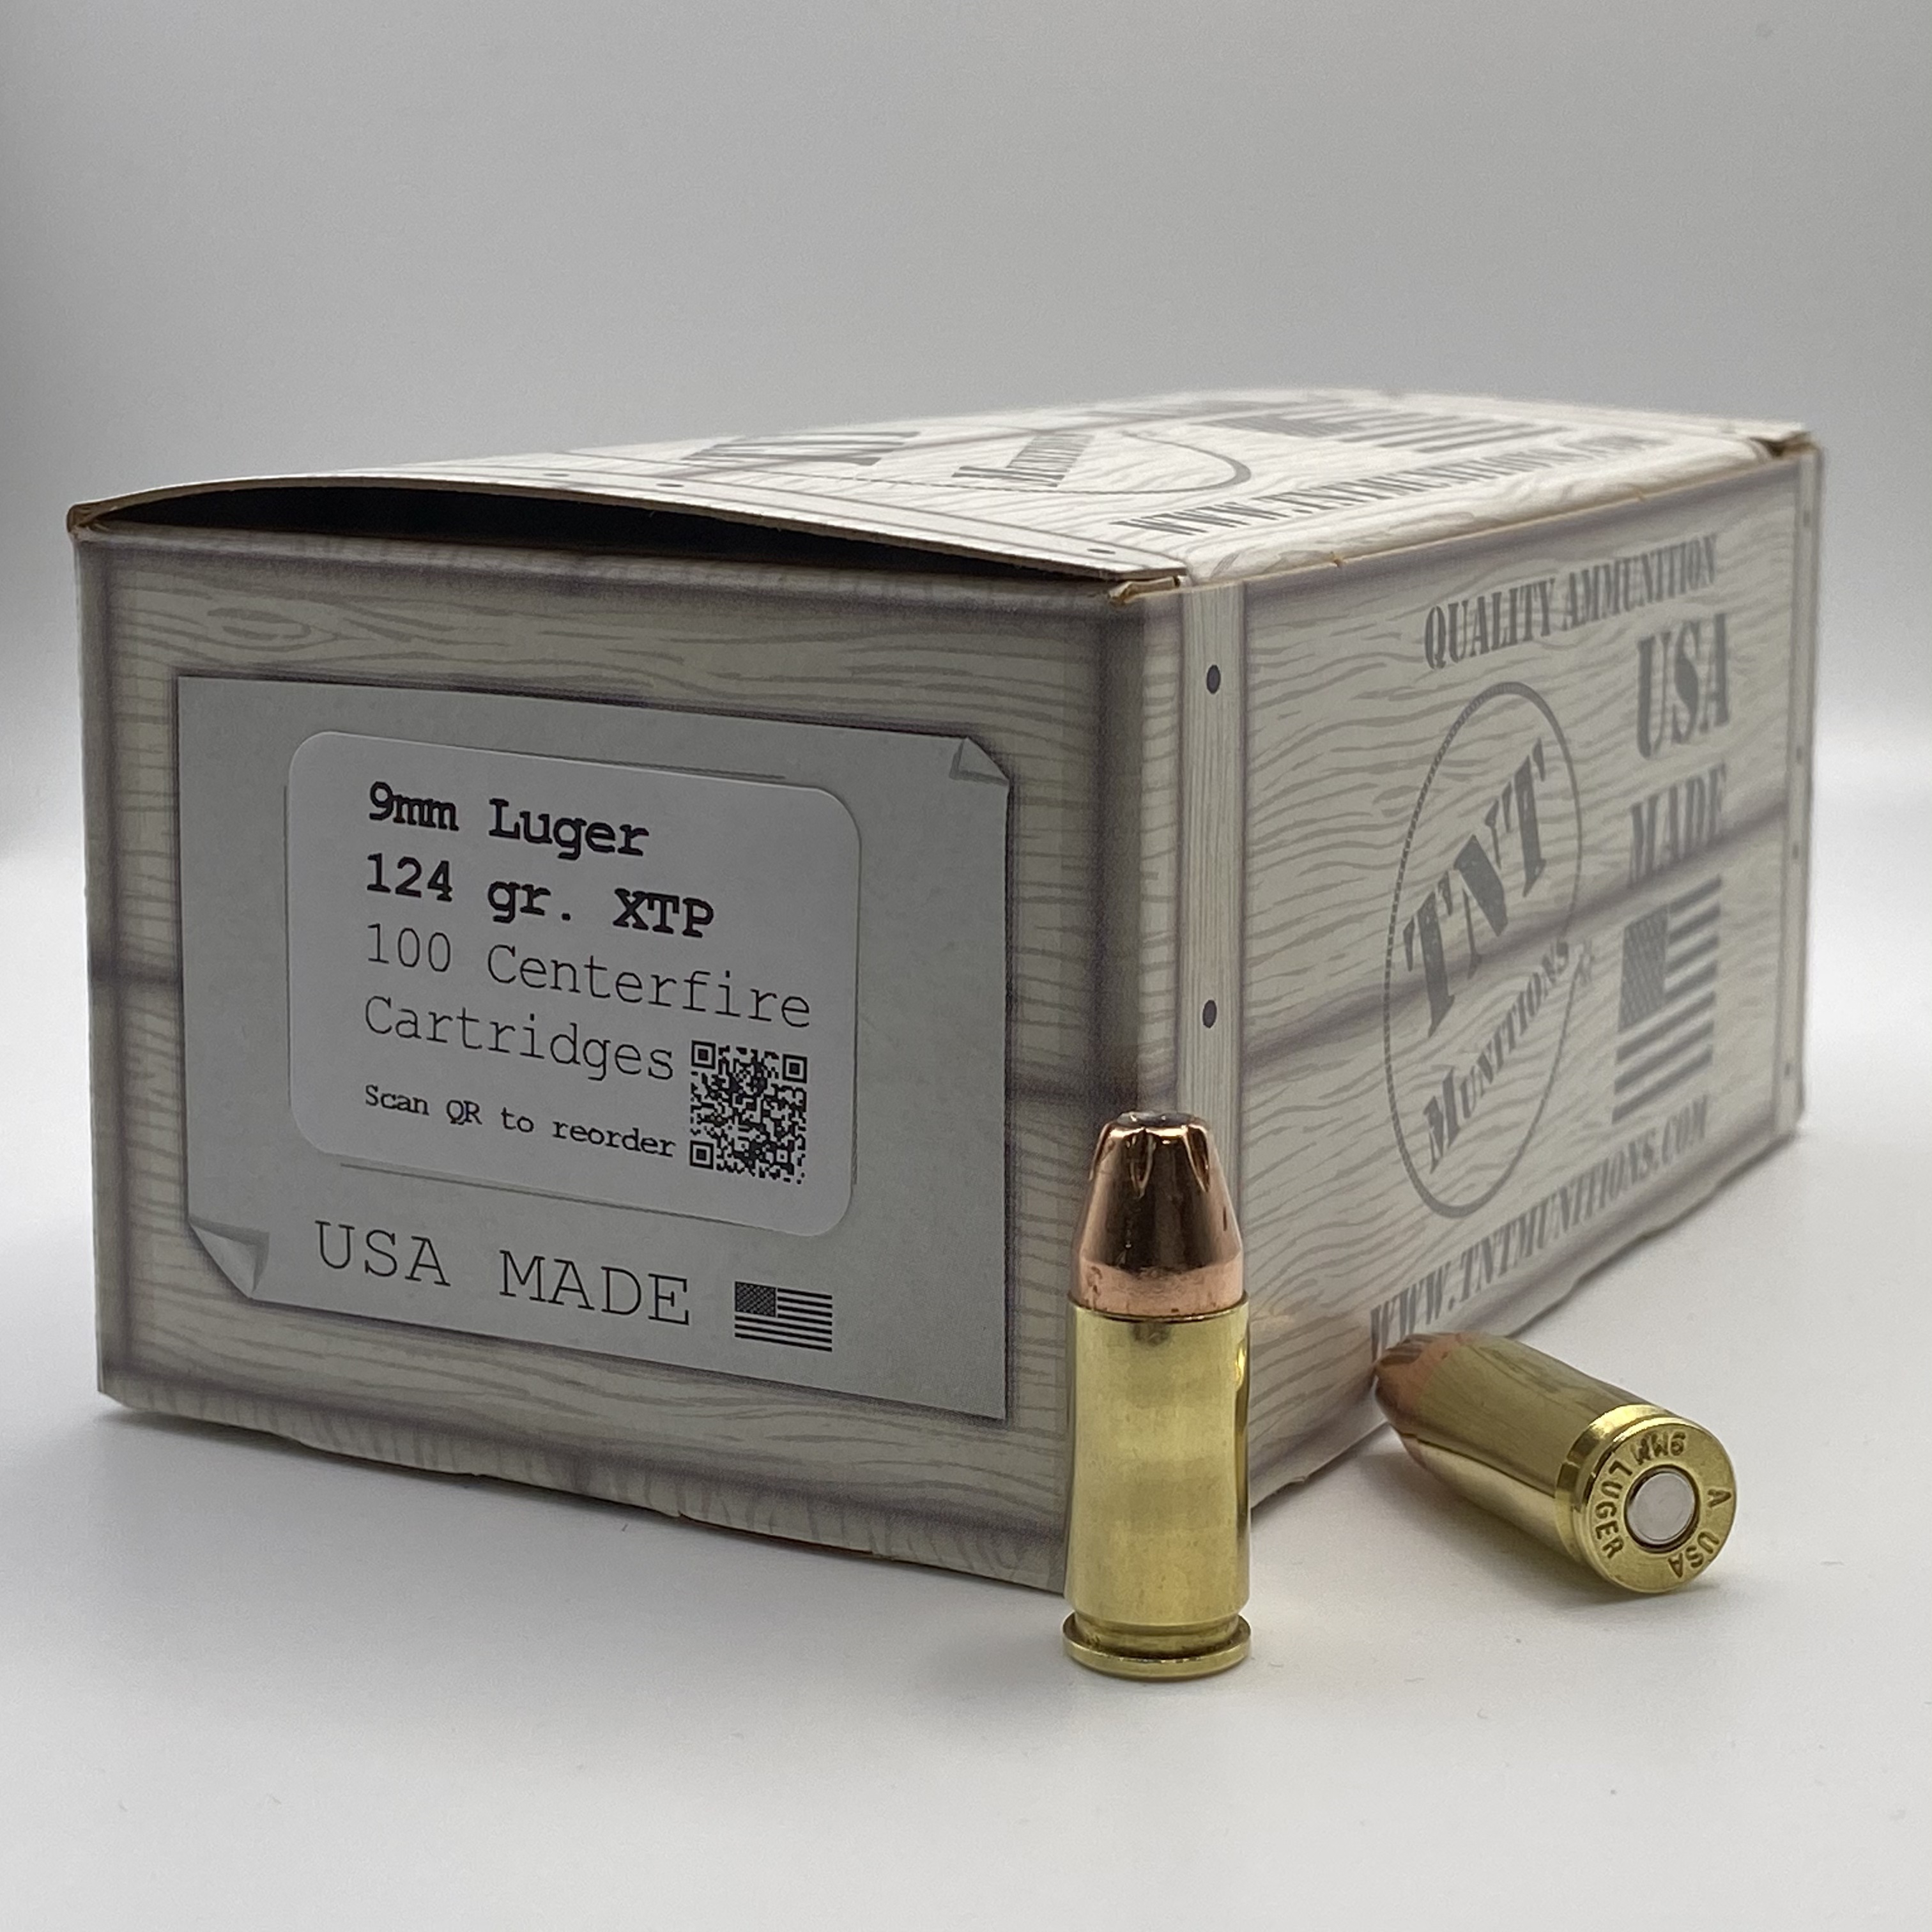 9mm Luger 124 gr. XTP Defense. MEMORIAL DAY SALE! THROUGH MAY 29TH ONLY - SHIPS NBD